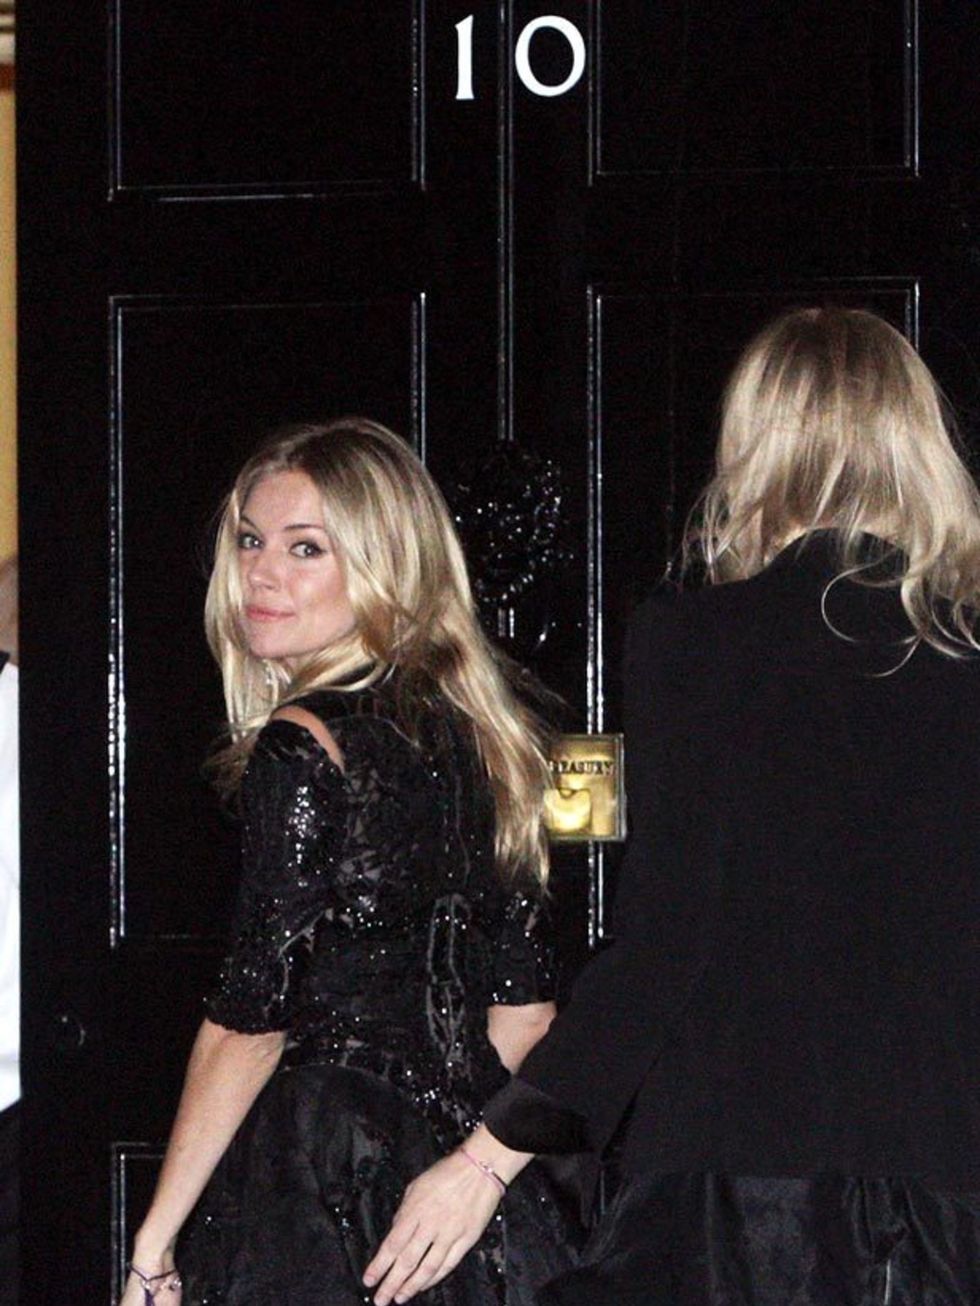 <p> <a href="http://www.elleuk.com/starstyle/style-files/%28section%29/Sienna-Miller/%28offset%29/0/%28img%29/184539">Sienna Miller</a> at a Downing Street party, 21 February 2011</p>